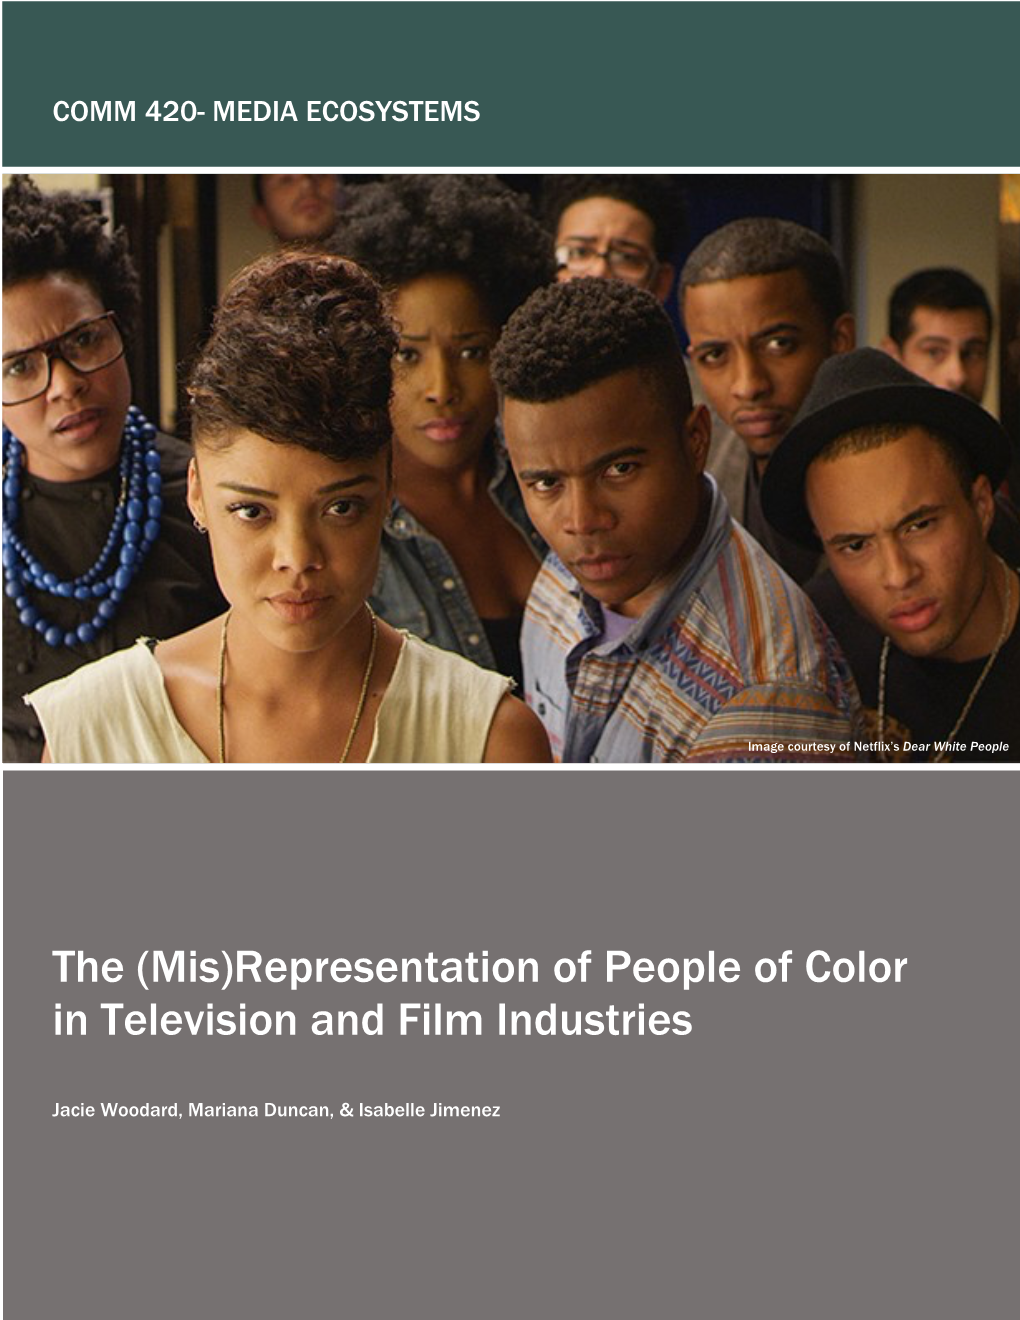 (Mis)Representation of People of Color in Television and Film Industries